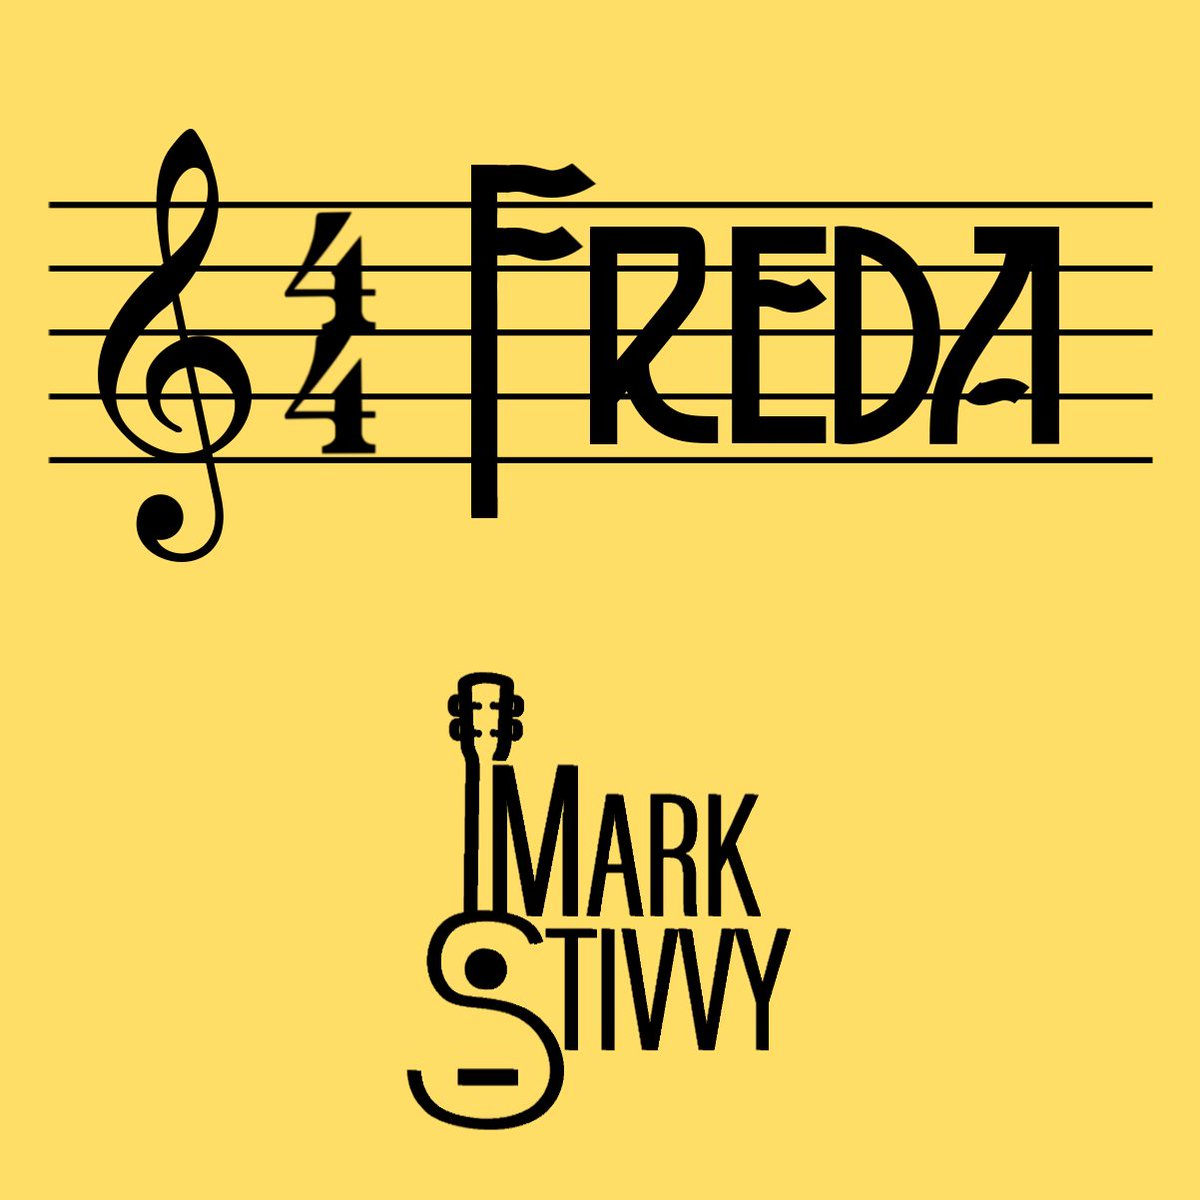 The ‘4/4 FREDA’ EP is now available to purchase online: markstivvy.bandcamp.com You can buy the physical CD, download a digital version of the whole EP, or download any tracks individually. All profits will be split between @Sunbeams_Music and @Every_Life_Cumb